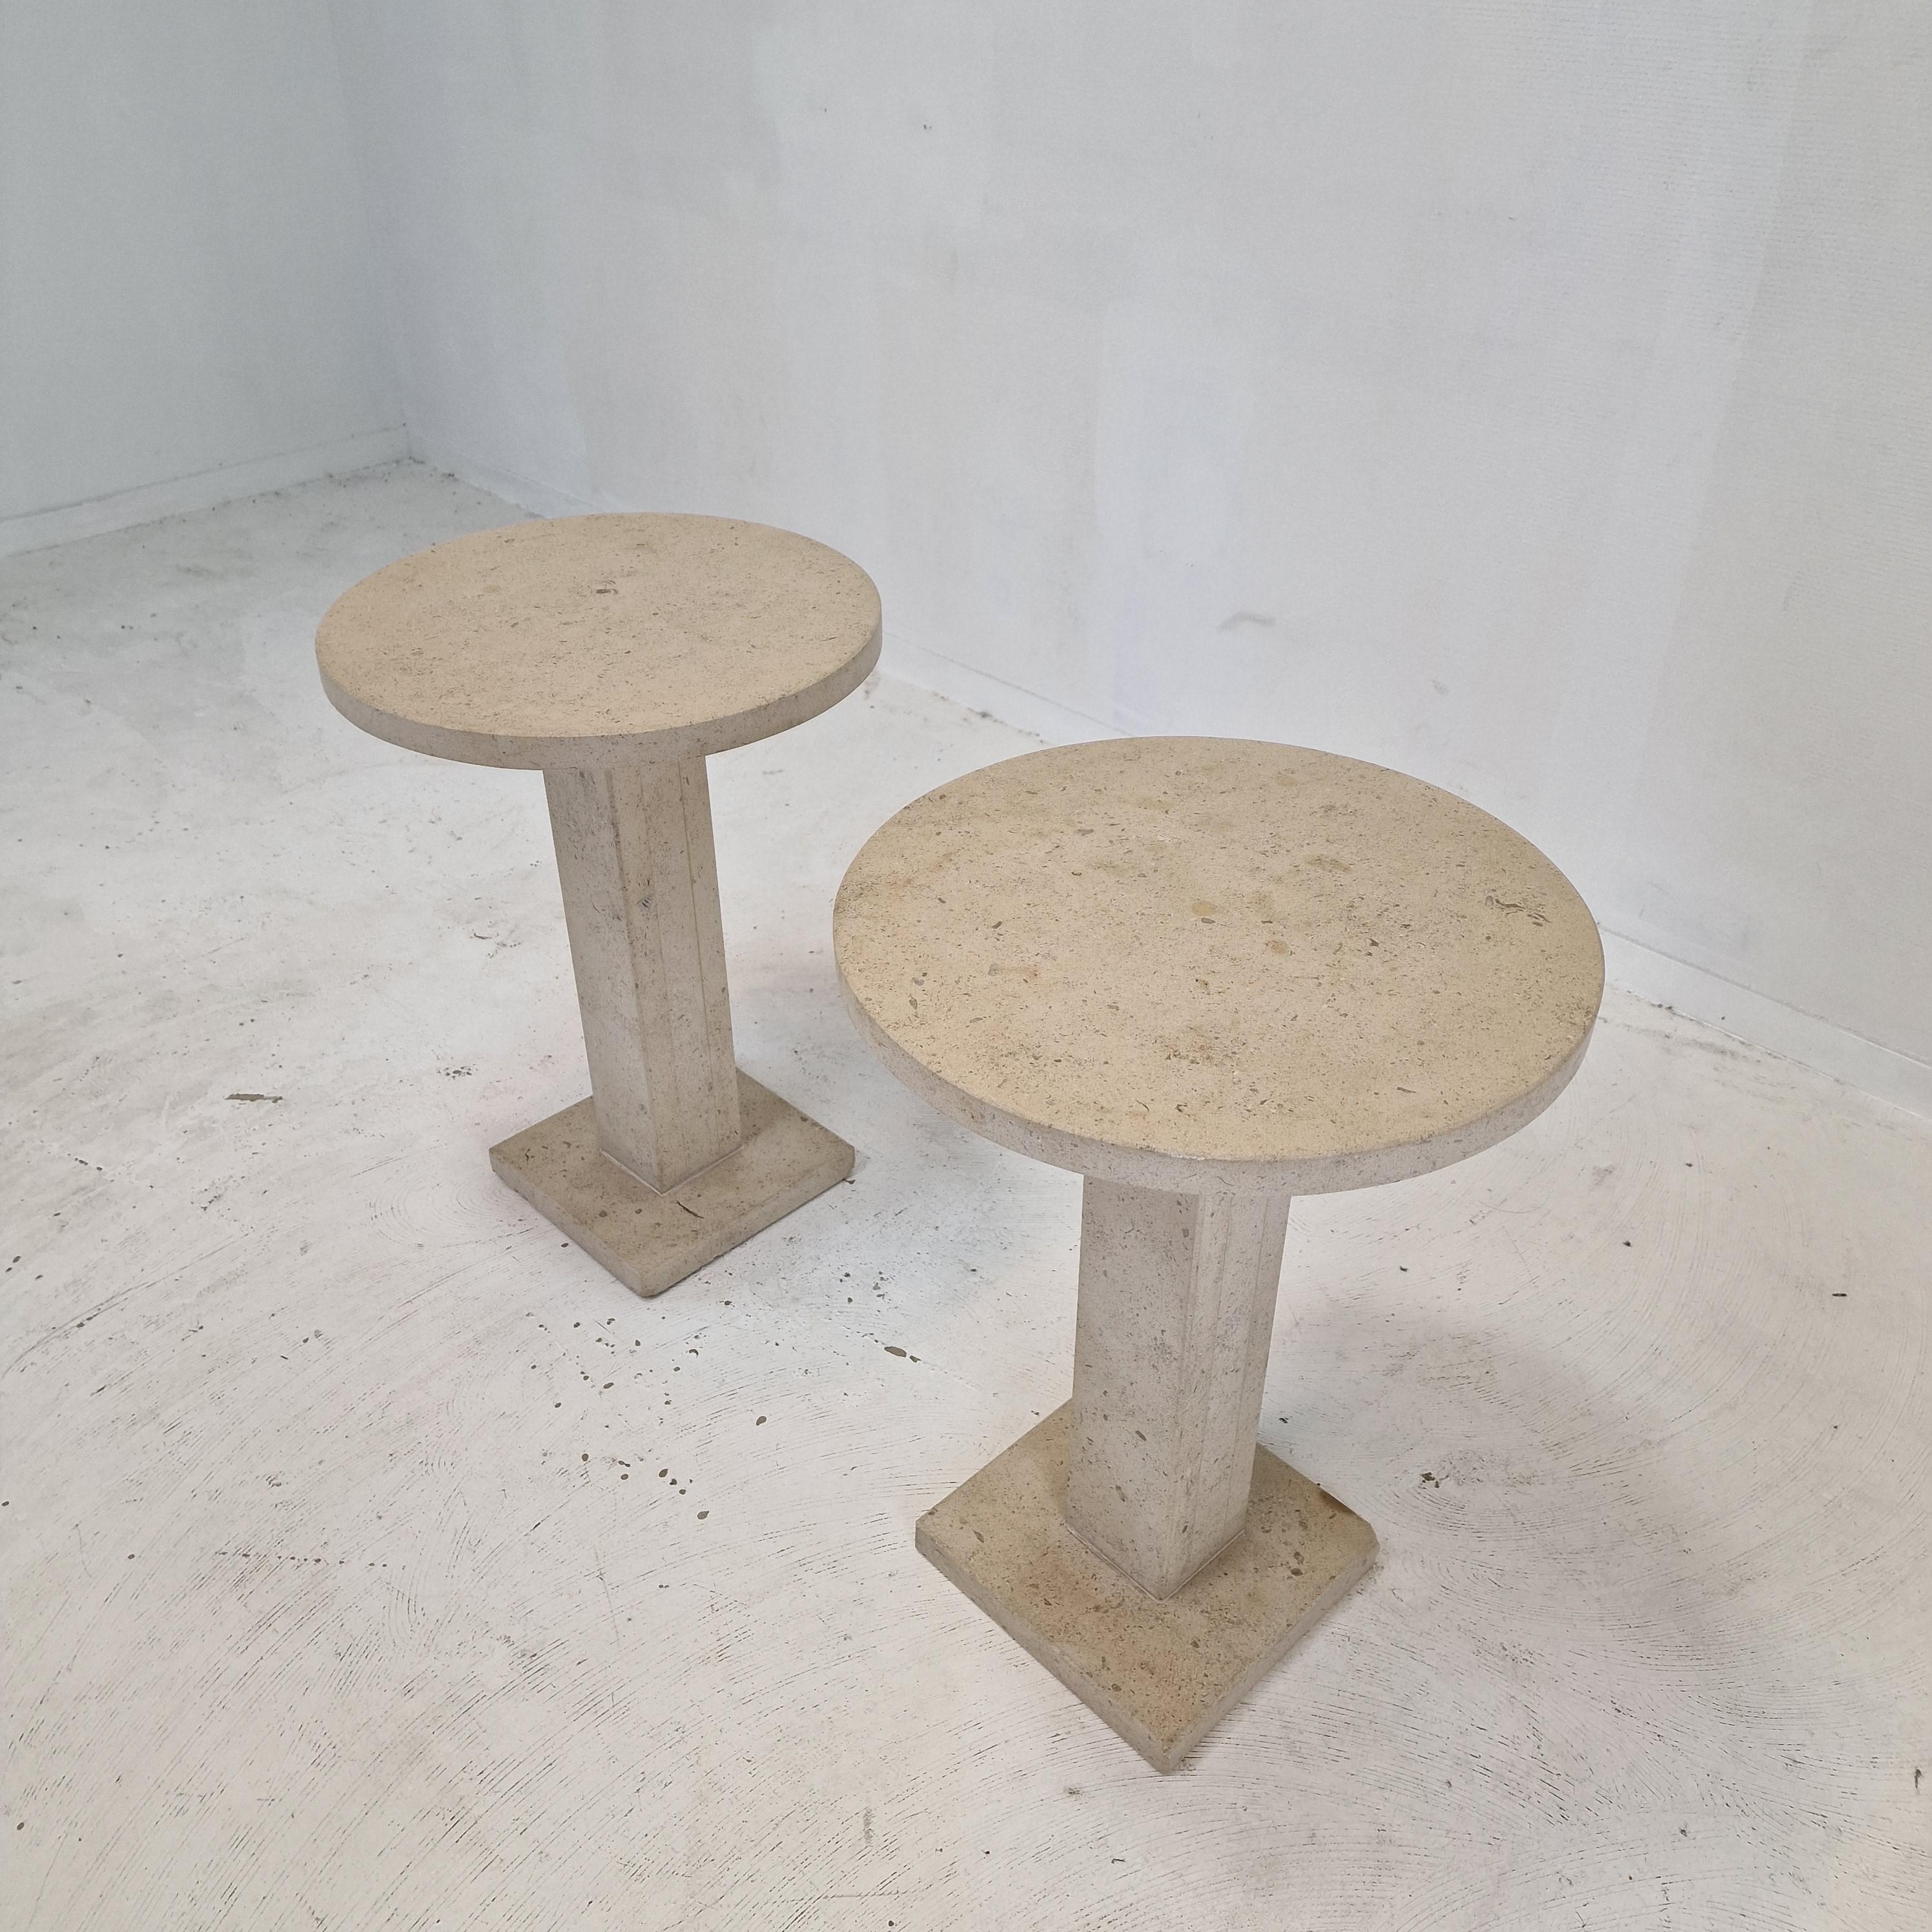 Set of 2 Italian Travertine or Stone Pedestals or Side Tables, 1980s For Sale 2